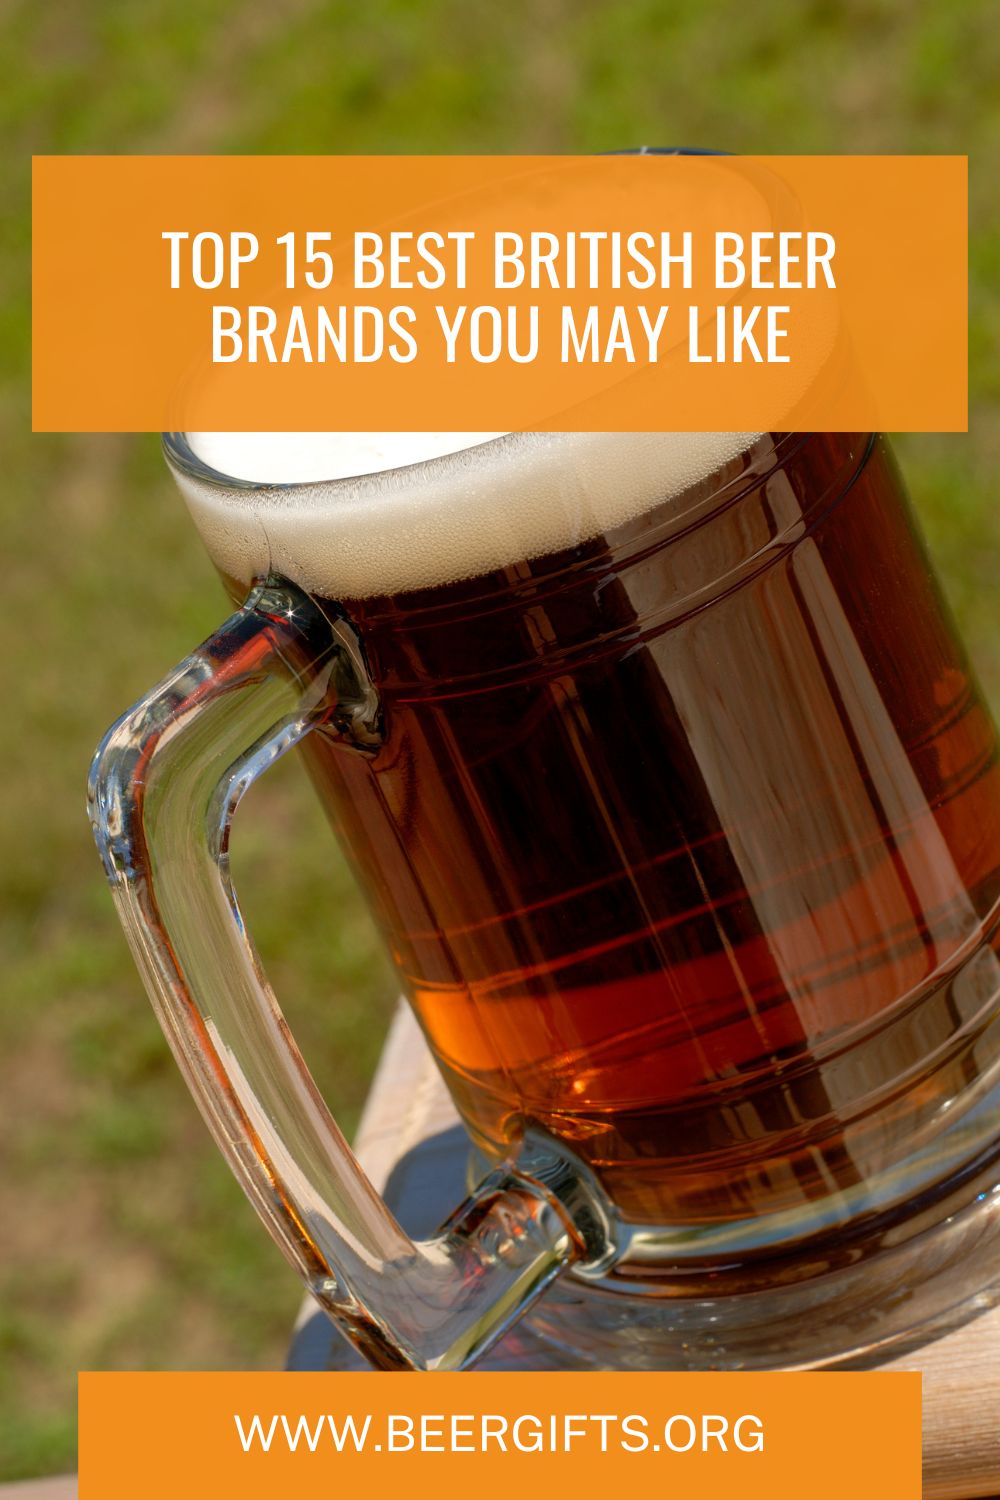 Top 15 Best British Beer Brands You May Like17